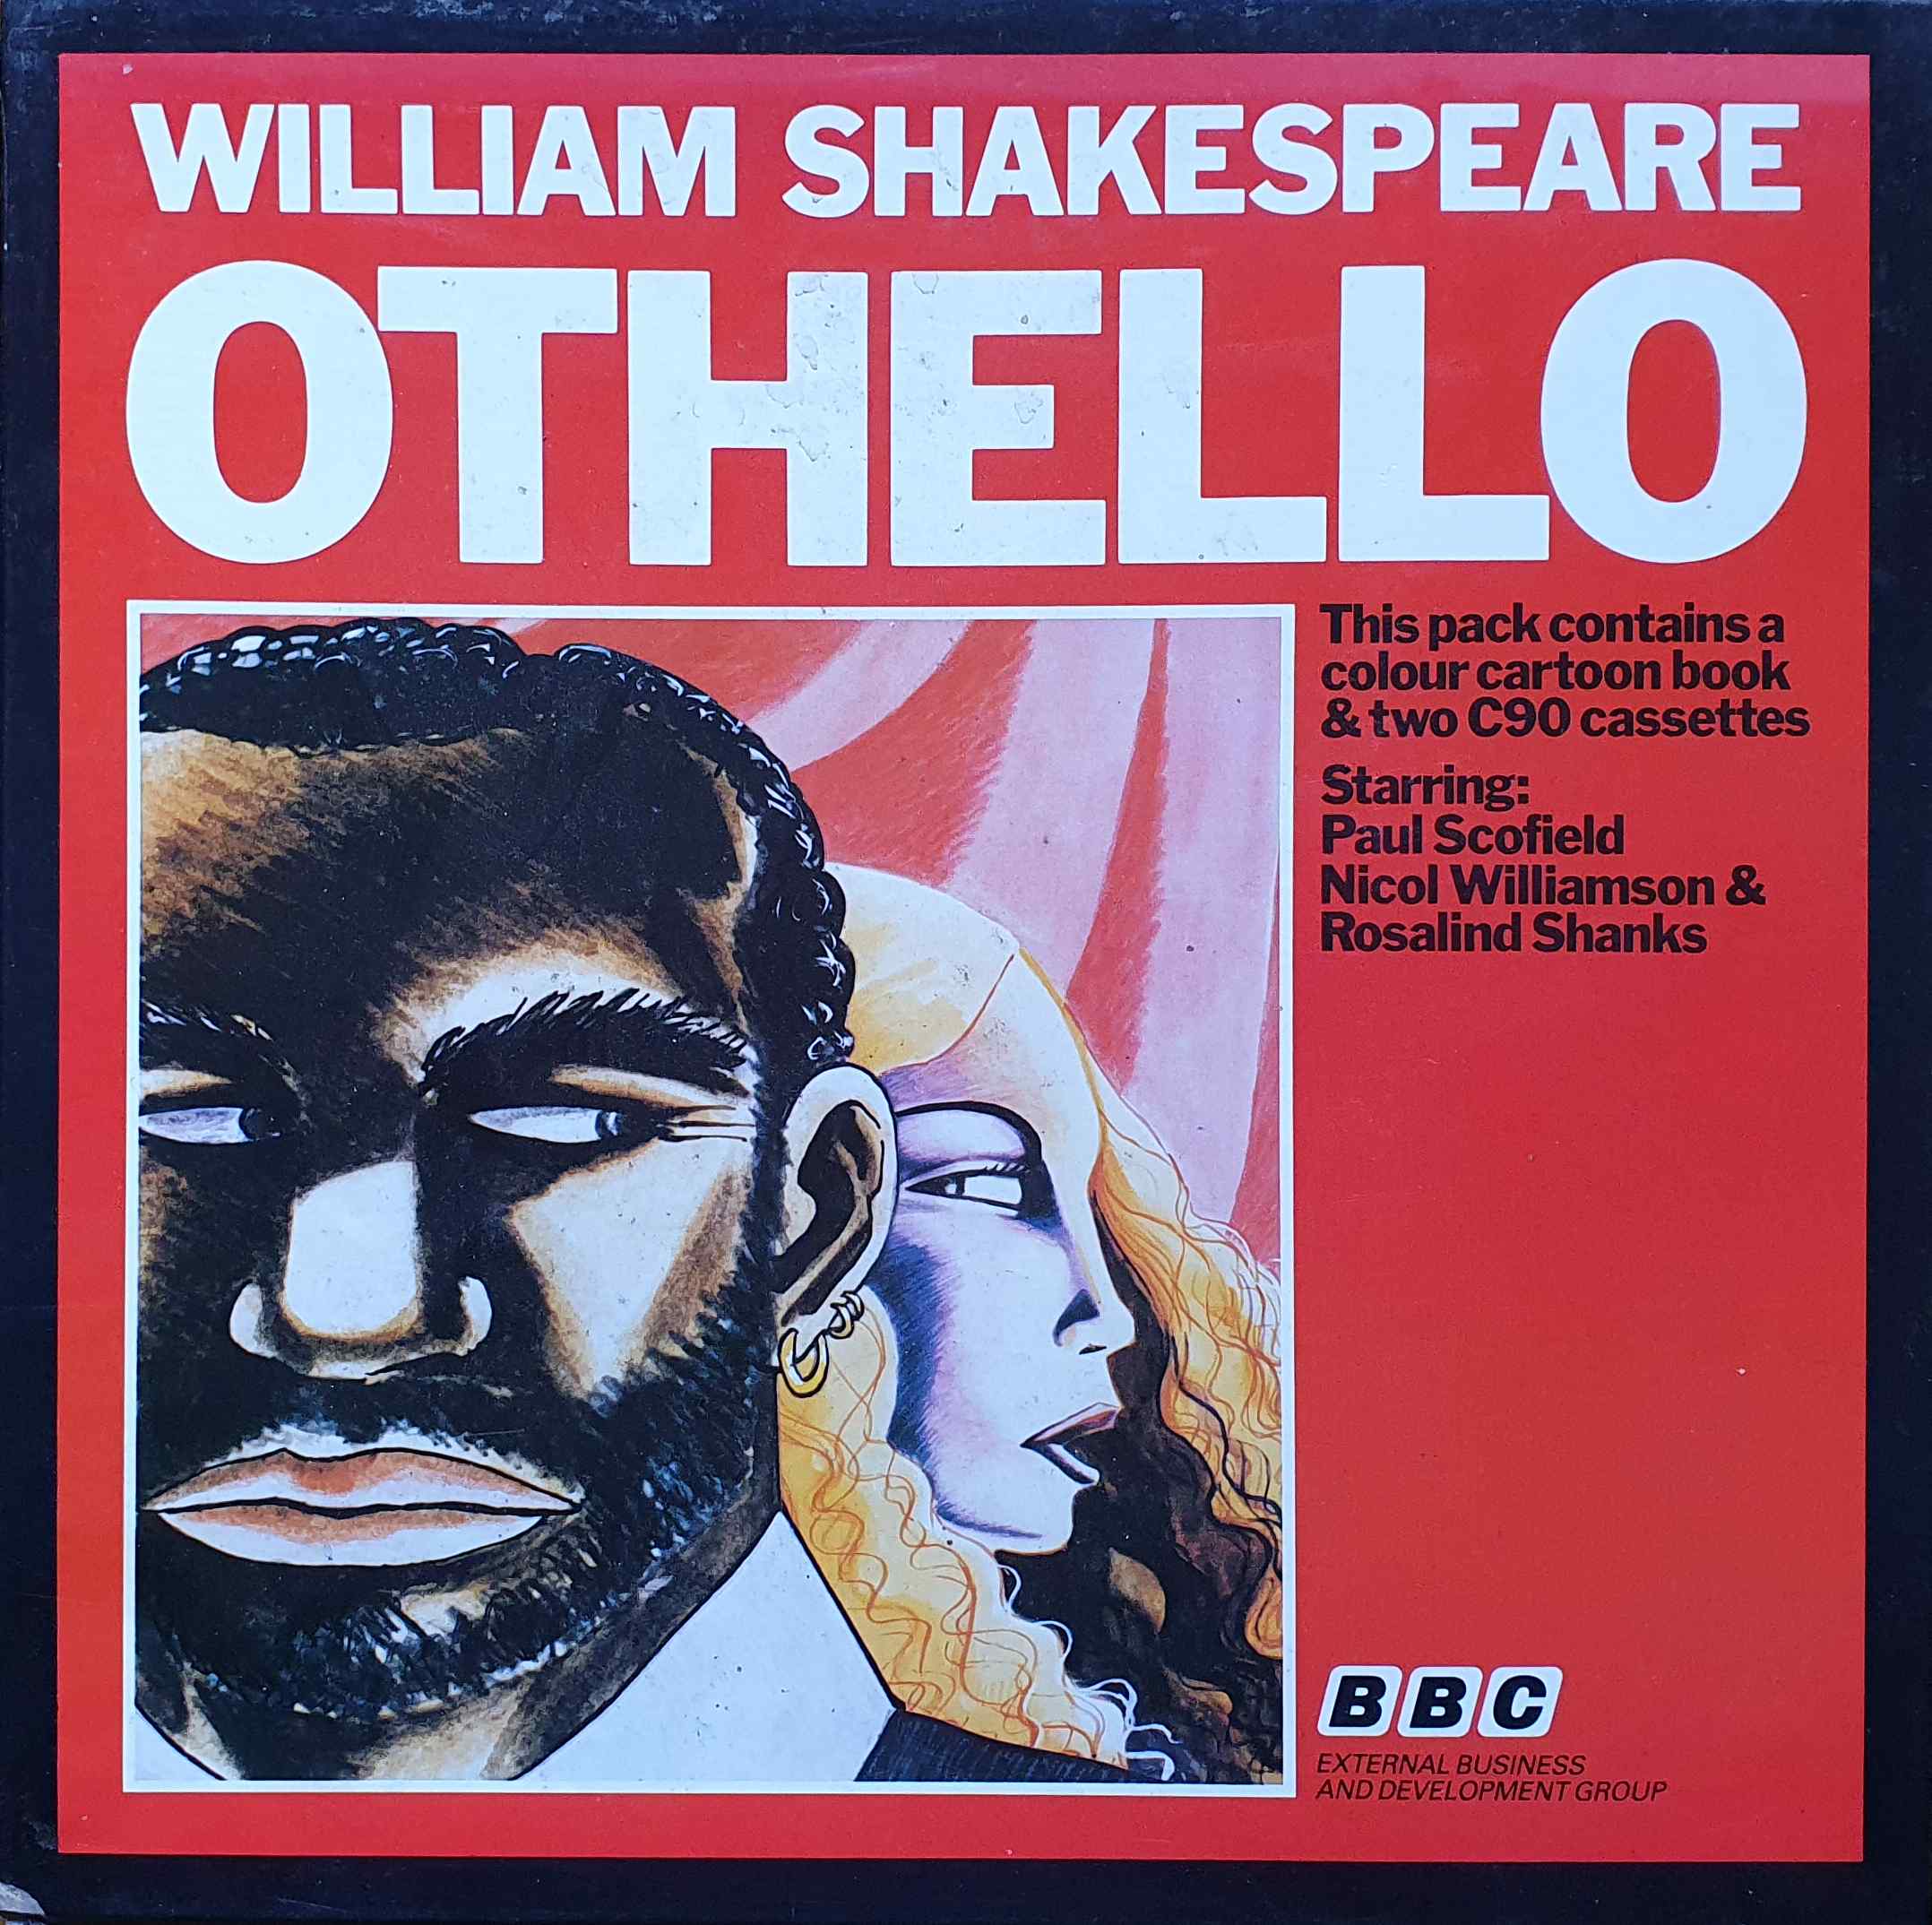 Picture of Othello by artist William Shakespeare from the BBC cassettes - Records and Tapes library